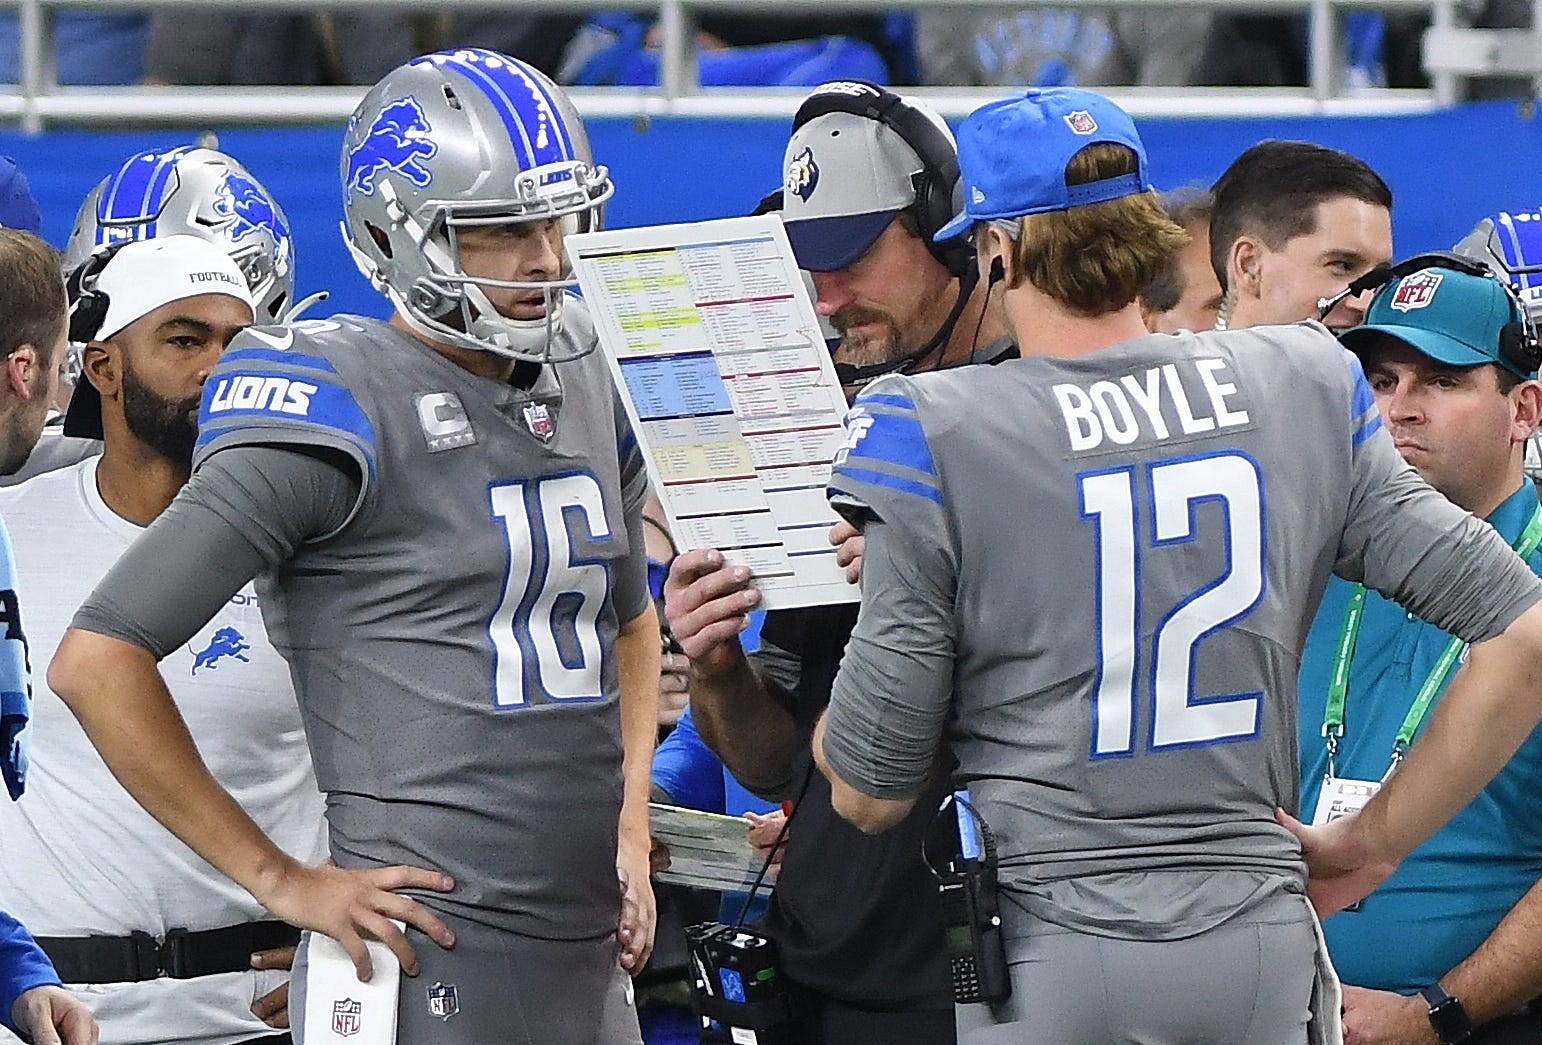 Lions quarterbacks Jared Goff and Tim Boyle work with coach Dan Campbell on the sideline during a break in the action in the fourth quarter.